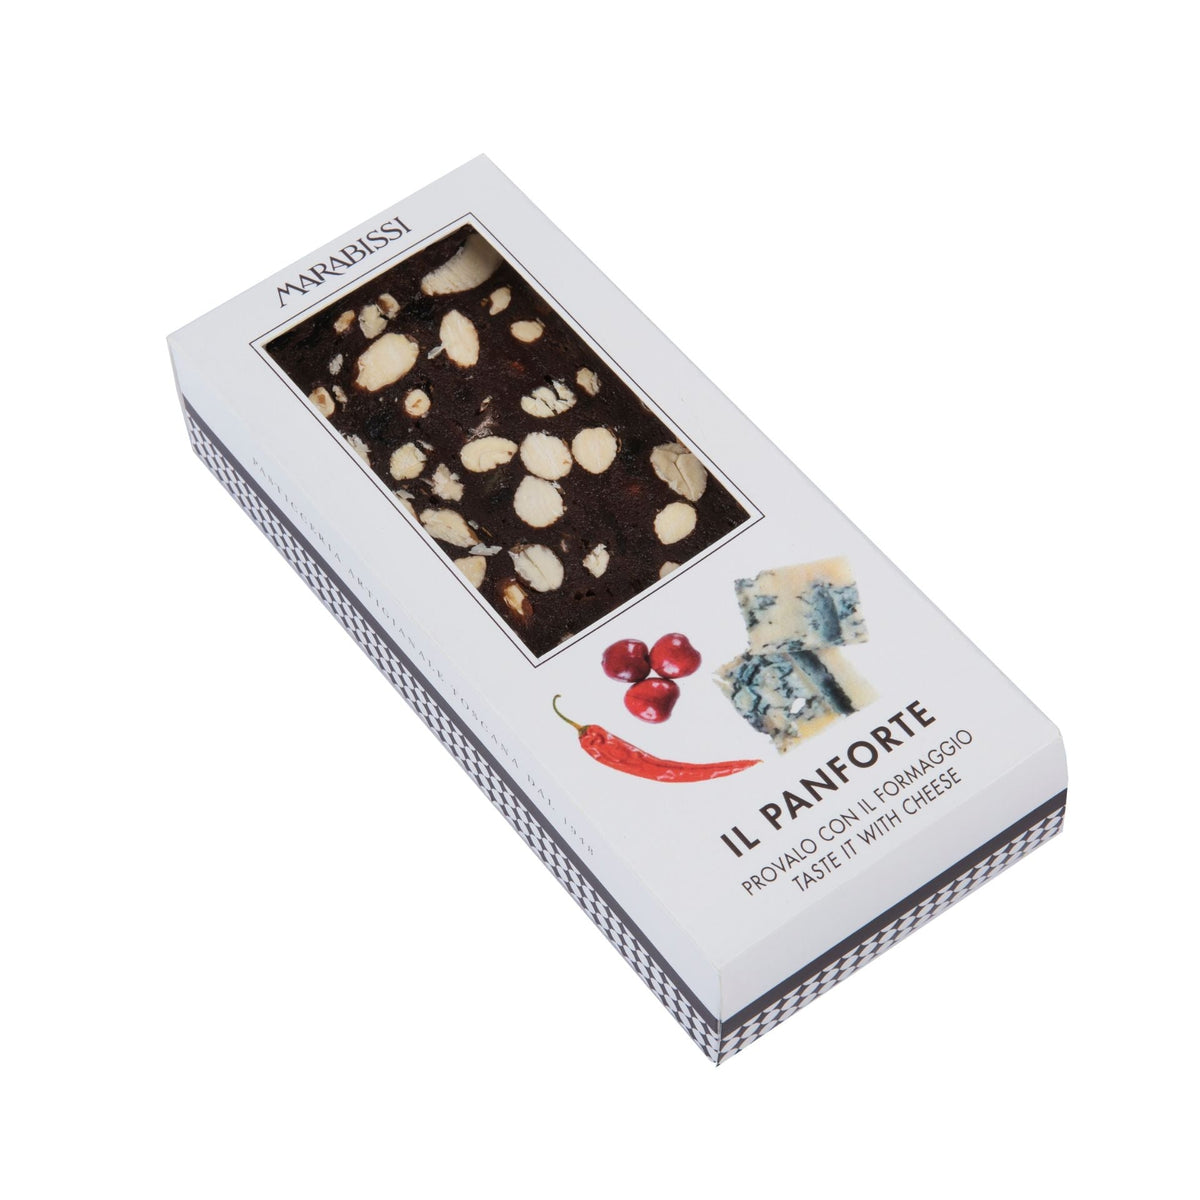 Marabissi Amarena Cherry &amp; Chilli Panforte Cake (Box) 200g  | Imported and distributed in the UK by Just Gourmet Foods